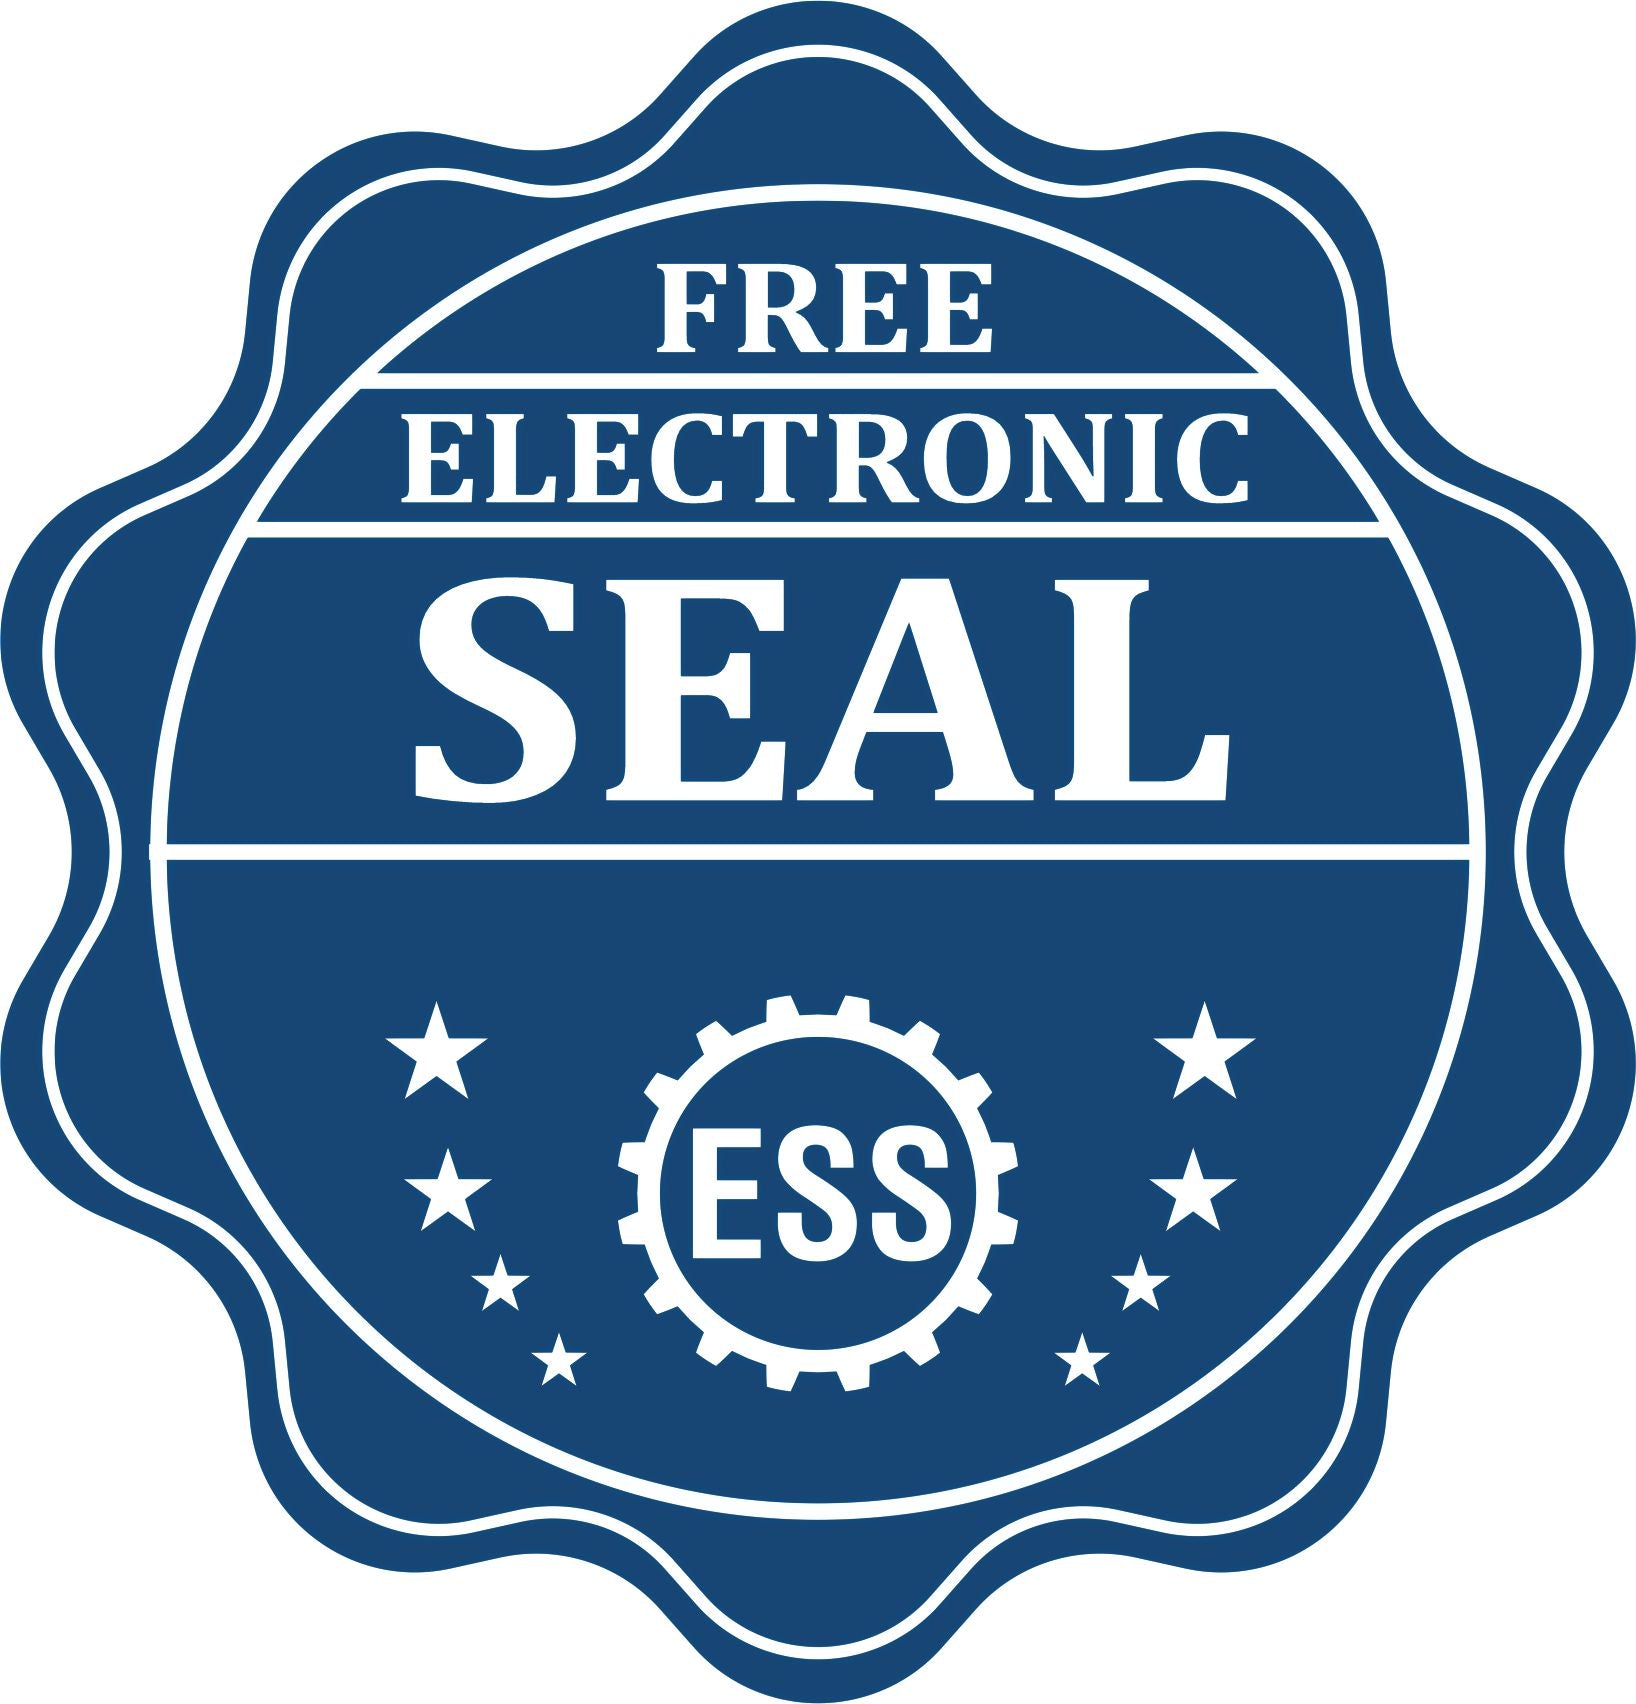 A badge showing a free electronic seal for the Gift South Dakota Engineer Seal with stars and the ESS gear on the emblem.